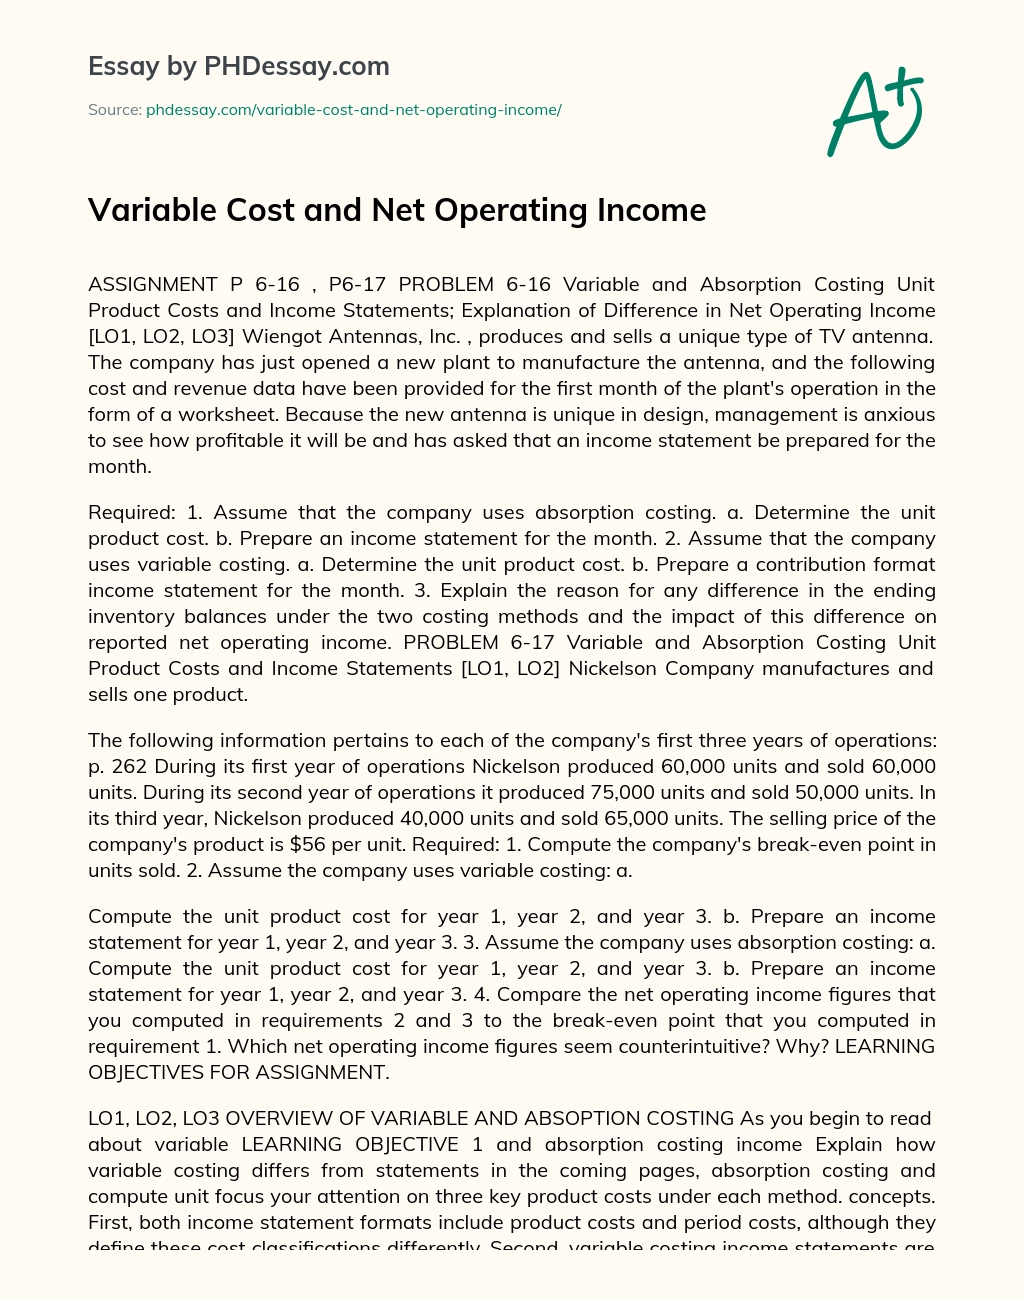 Variable Cost and Net Operating Income essay